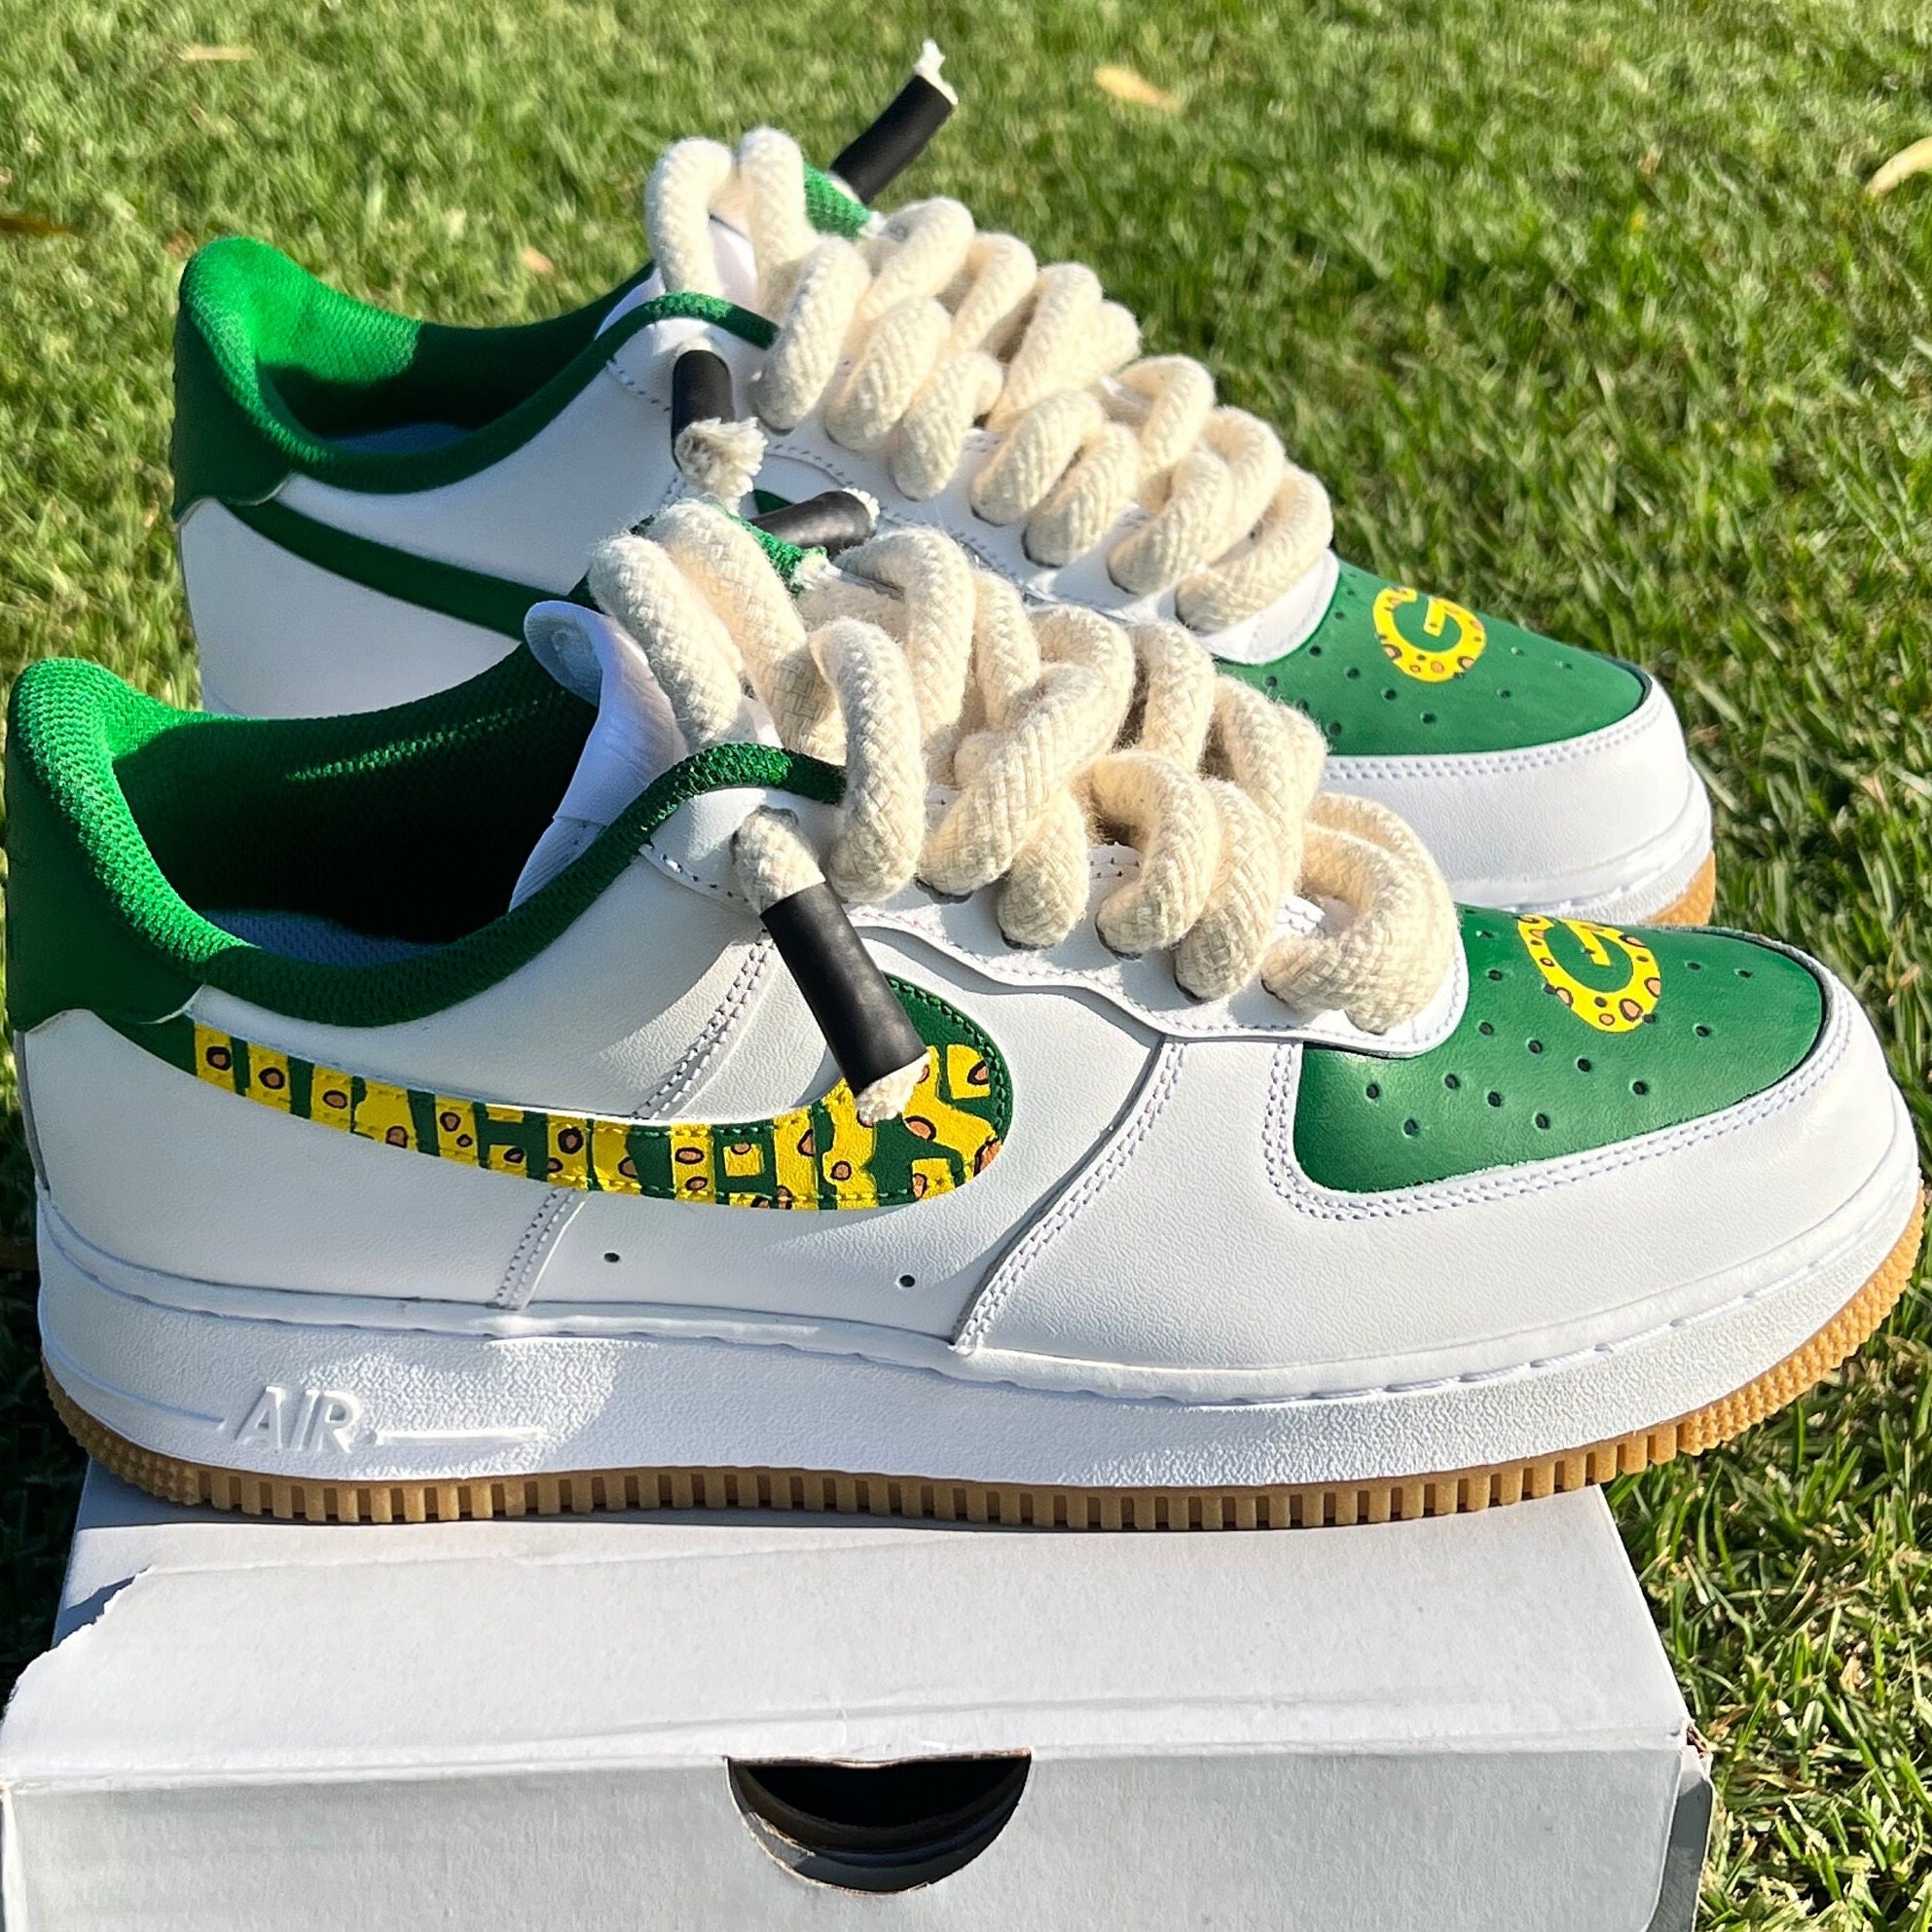 green bay packers high top shoes